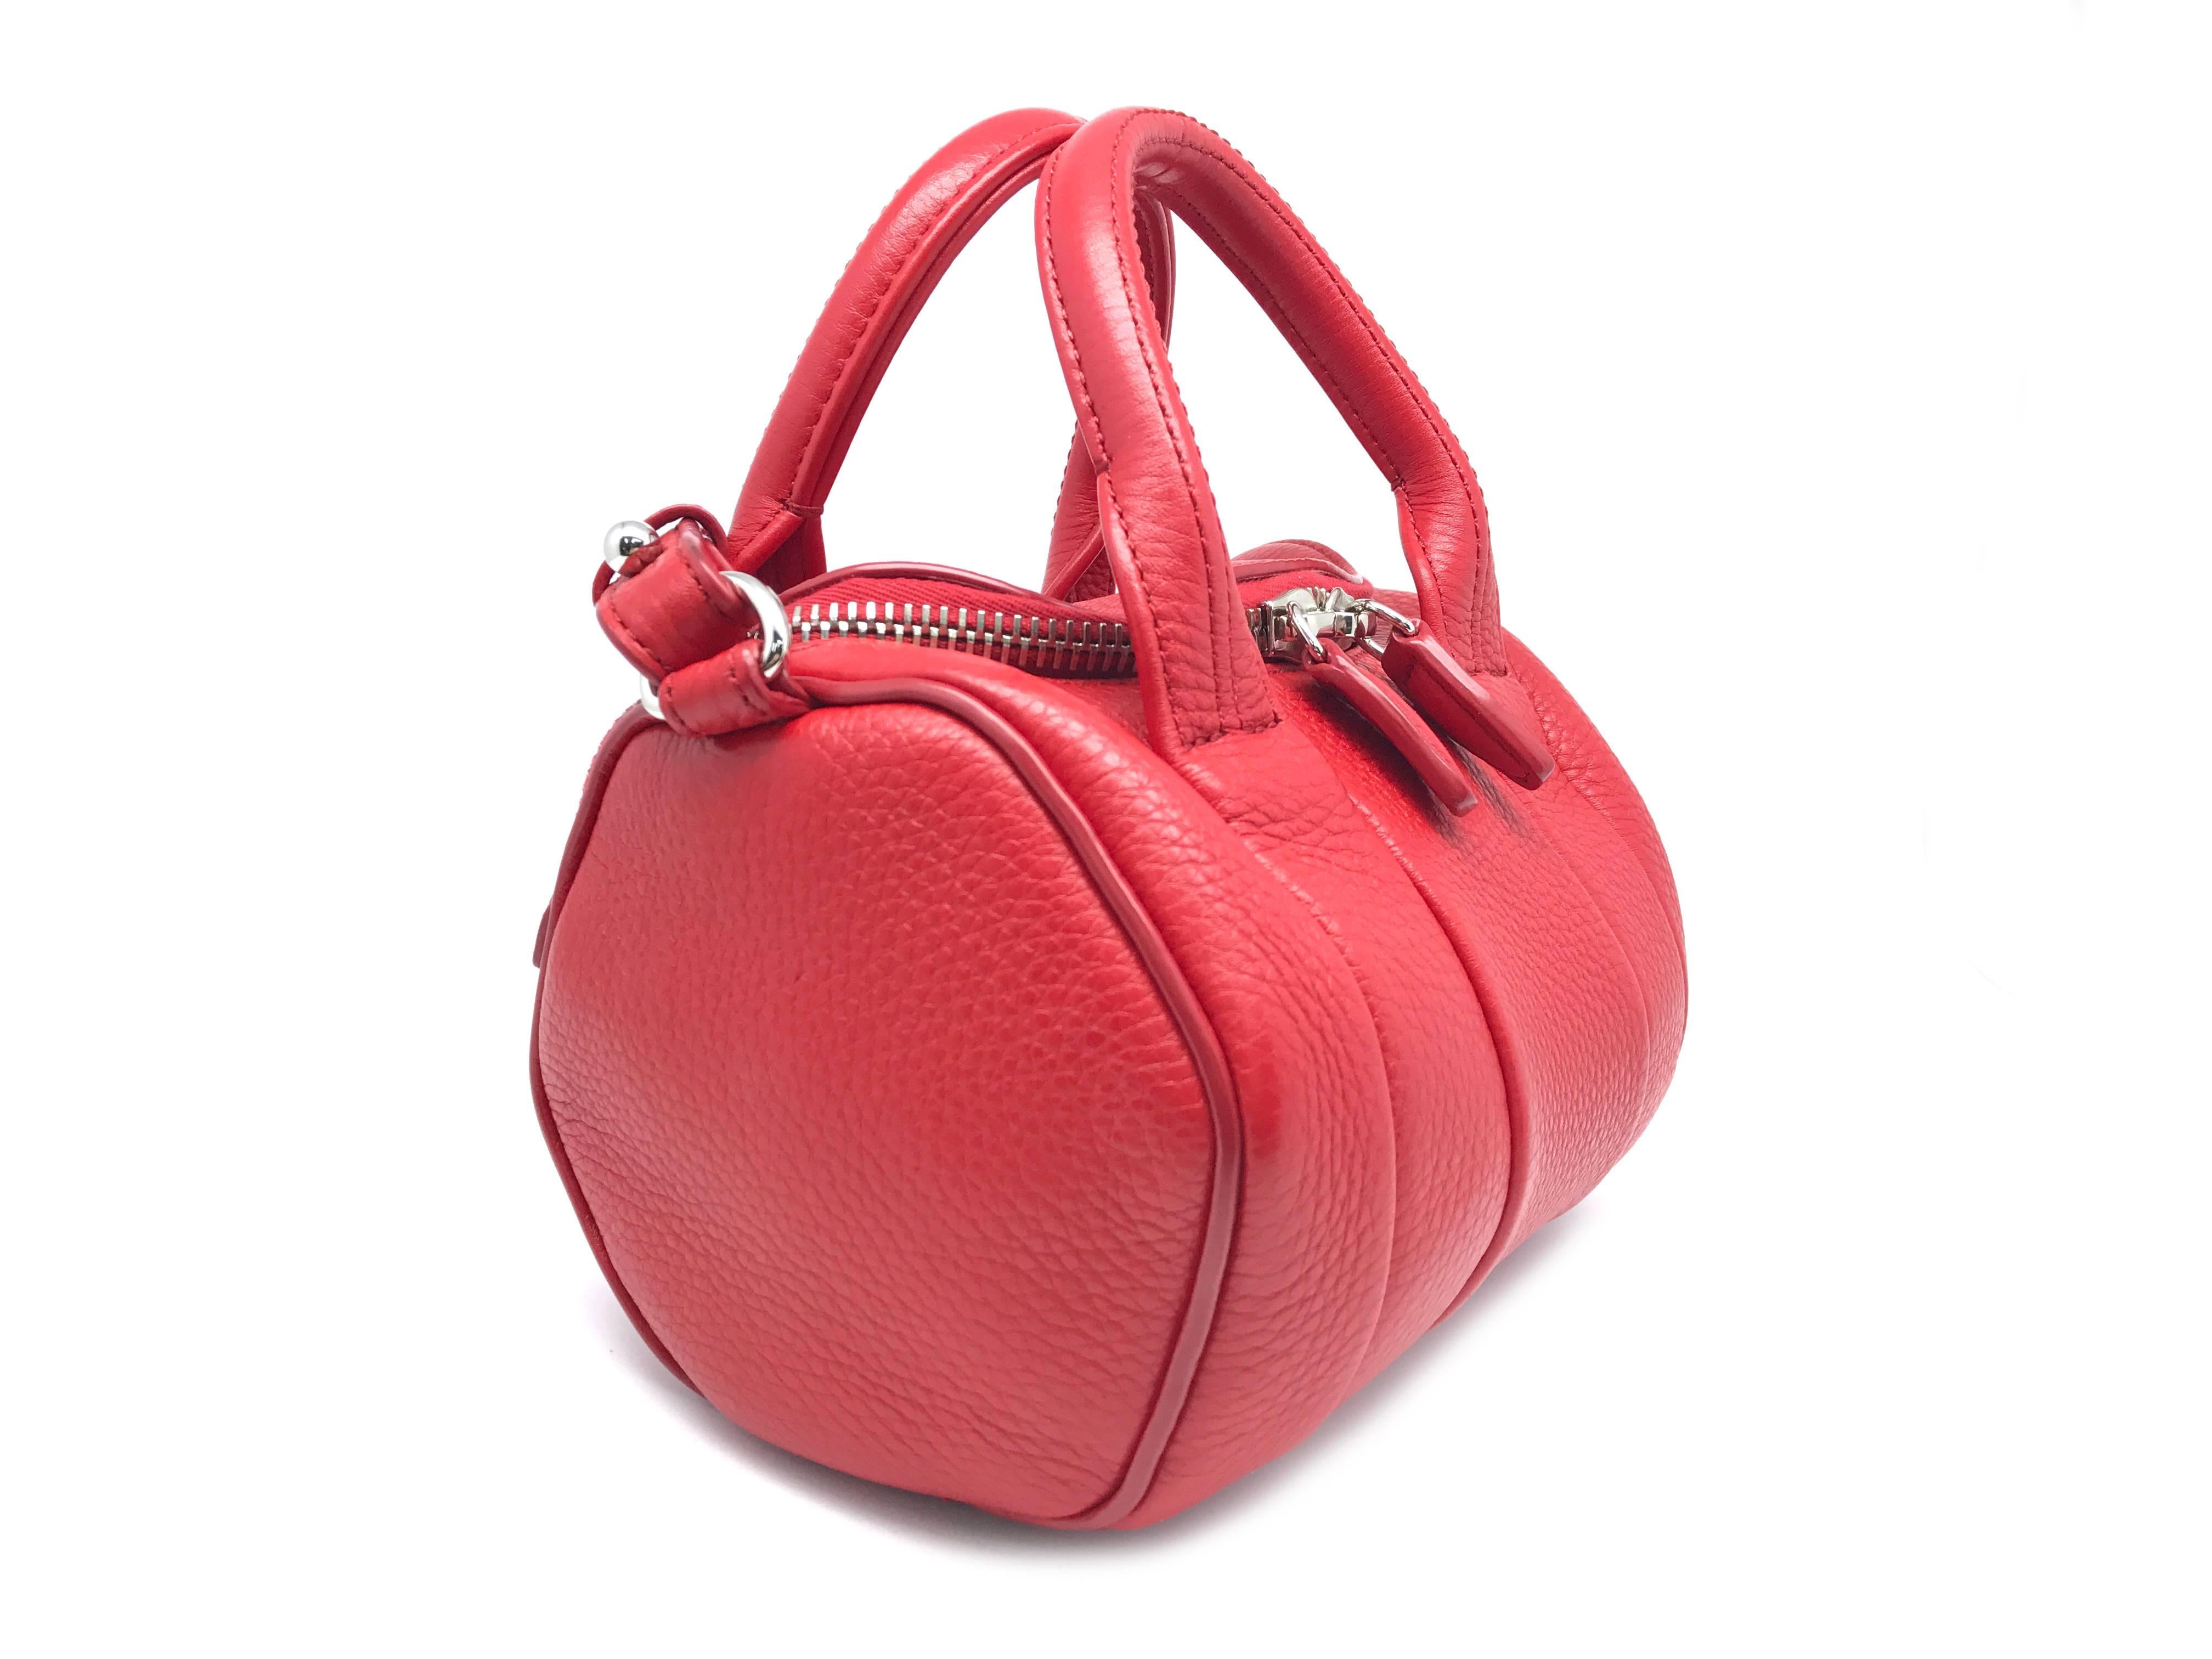 Color: Red 

Material: Calfskin Leather

Condition: Rank S
Overall: Almost New
Surface: Minor Scratches
Corners: Good
Edges: Good
Handles/Strap: MInor Scratches
Hardware: Good

Dimensions: W20×H13×D13cm
Handles: 27cm
Shoulder Strap: 115cm

Comes